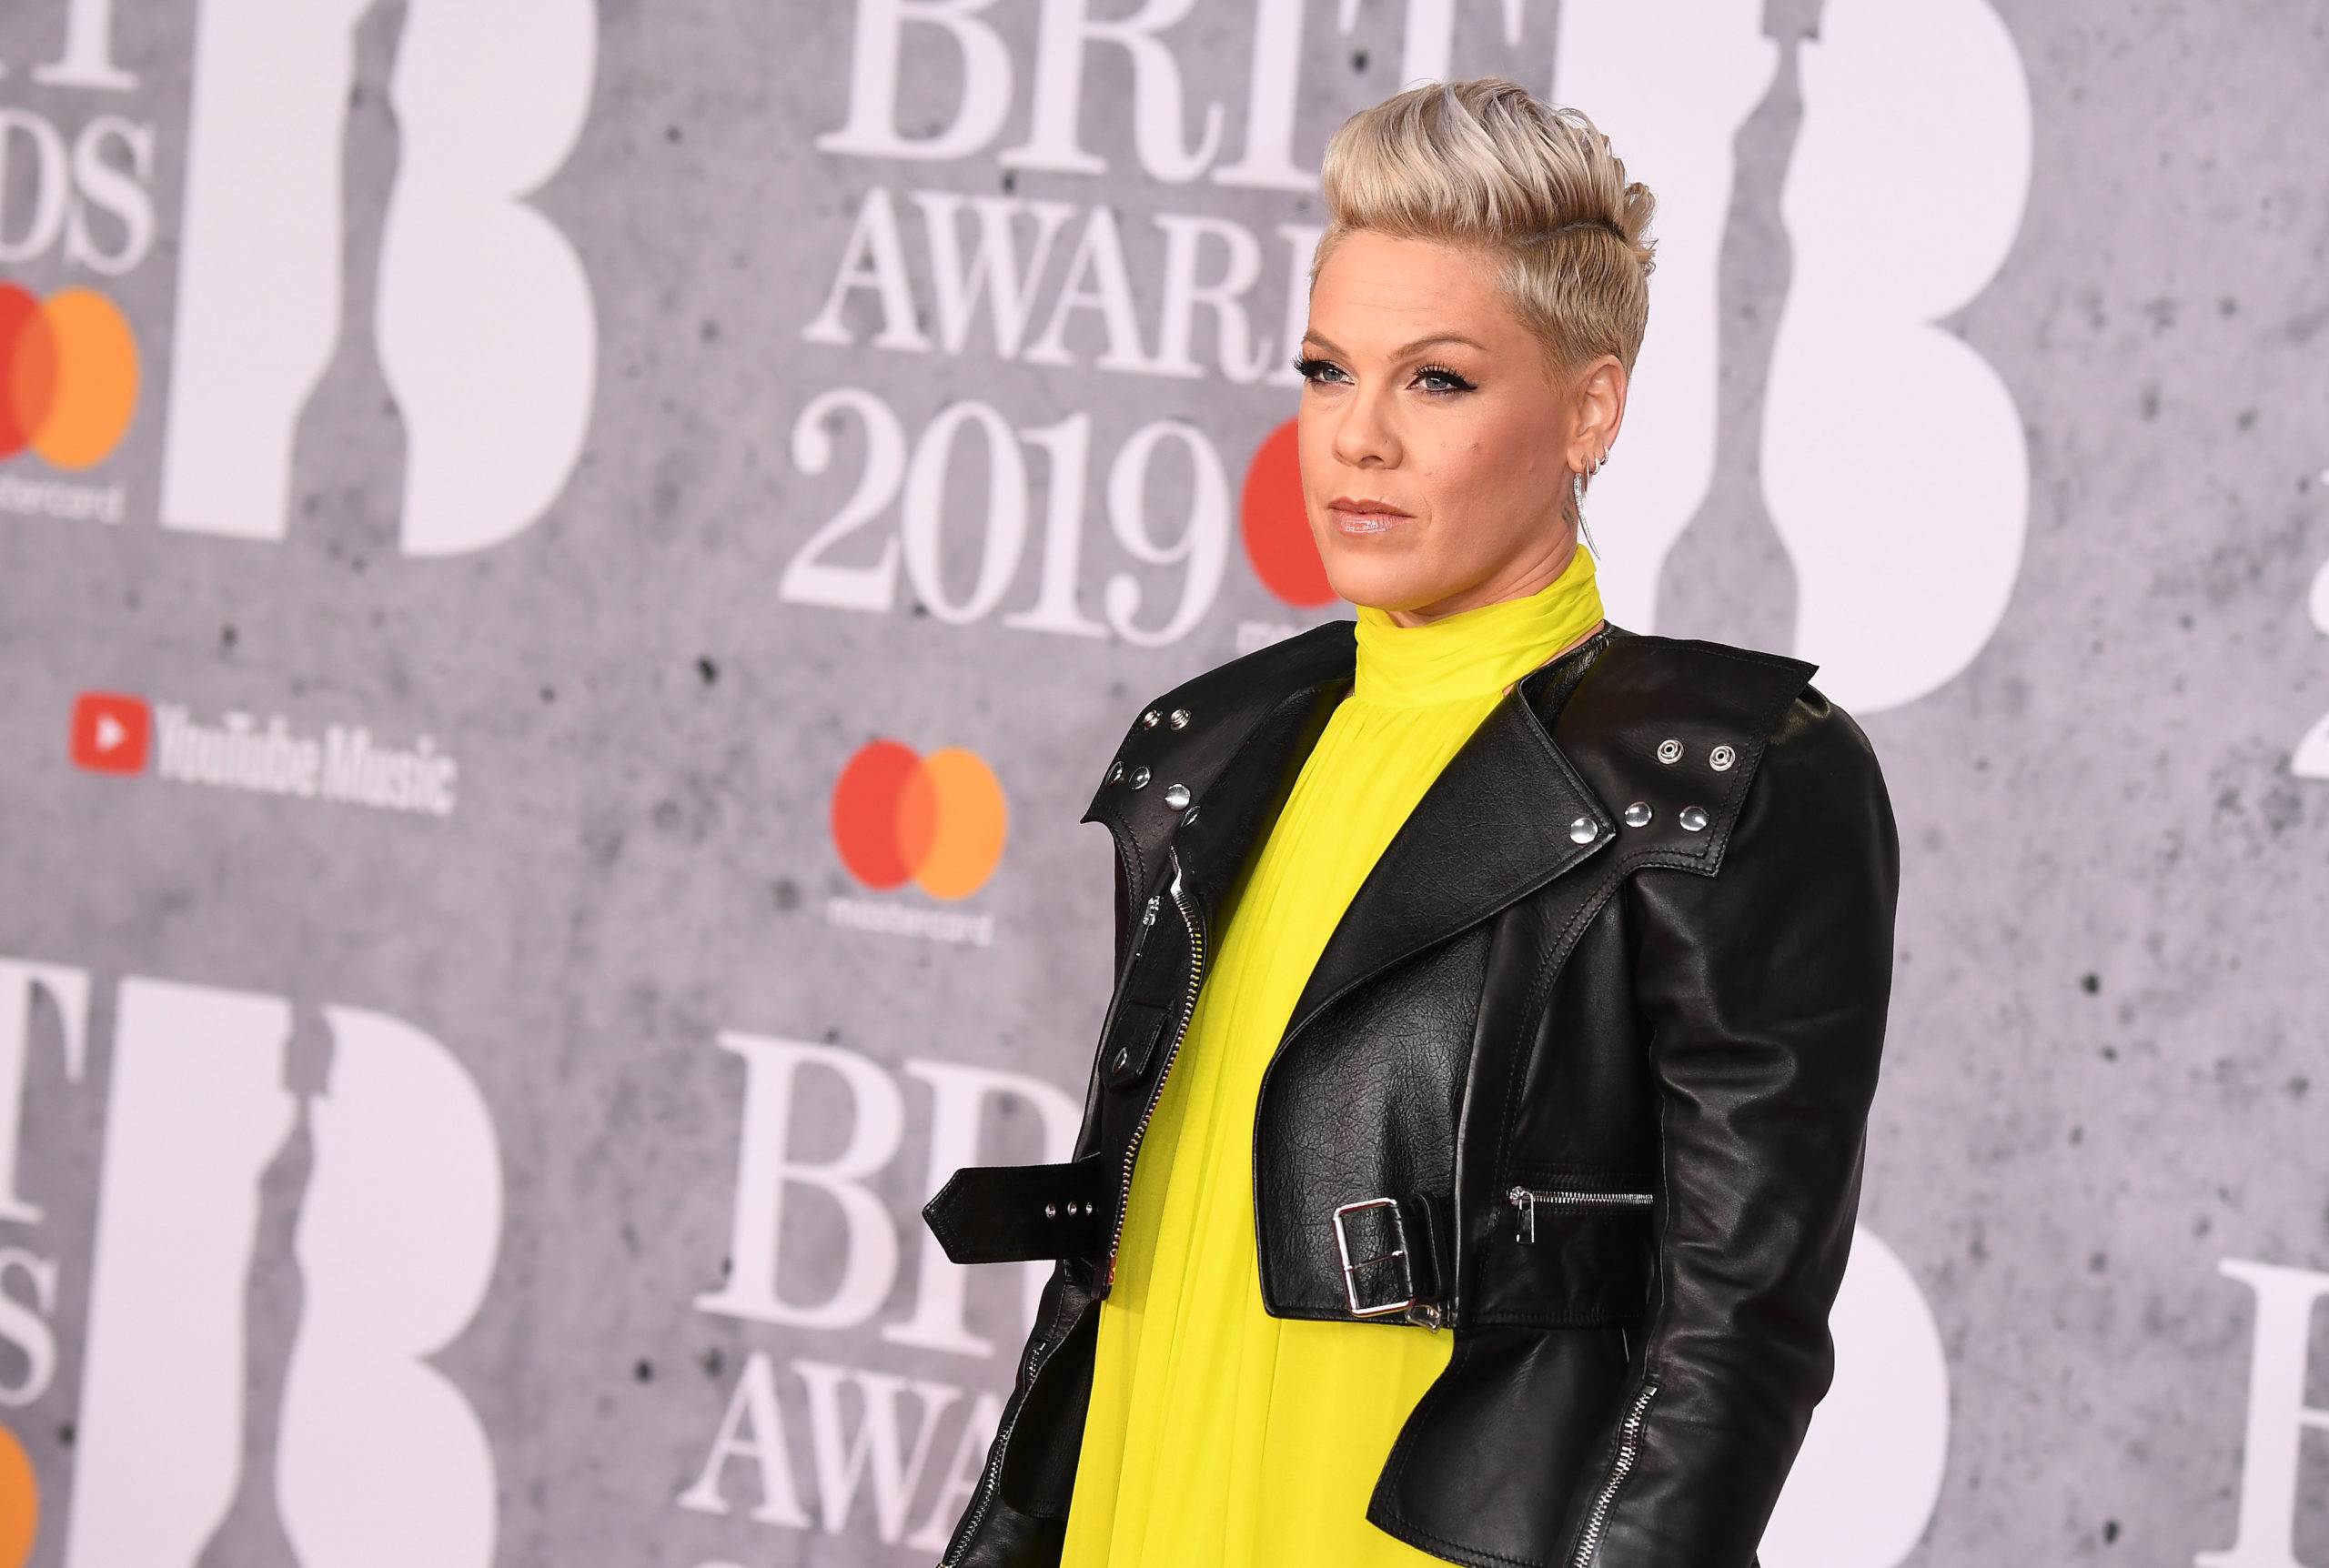 Pink Is Taking a Break From Music to Focus on Her Family